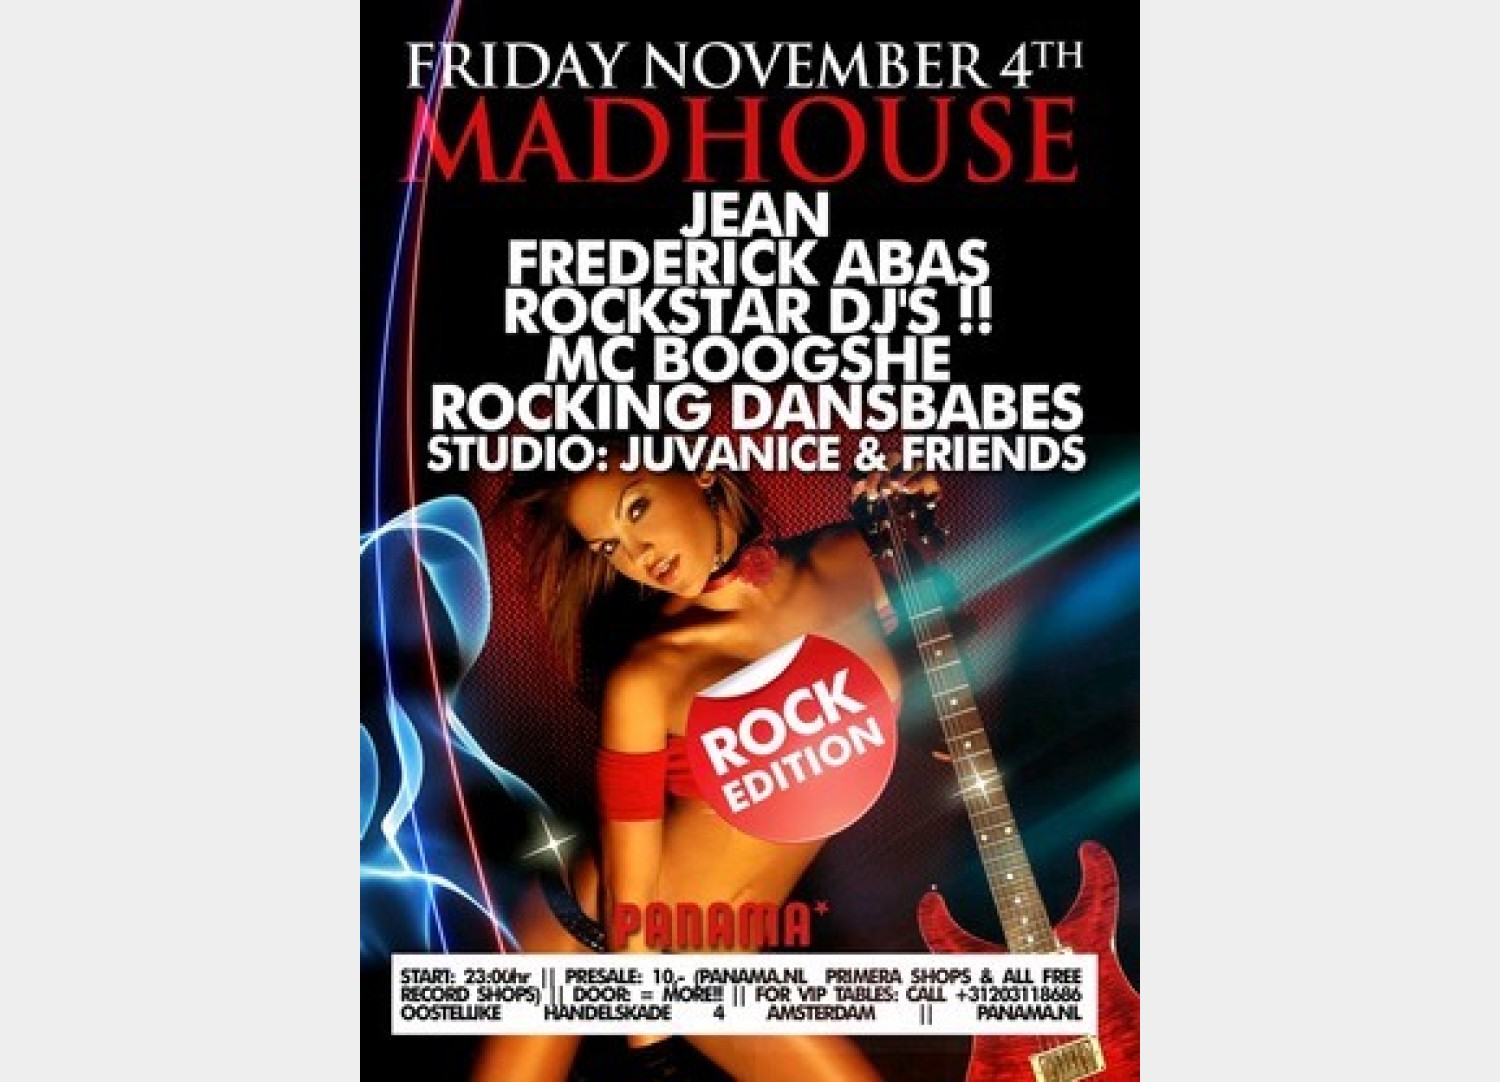 Party nieuws: Madhouse, the Rock Edition, vrijdag 4 november